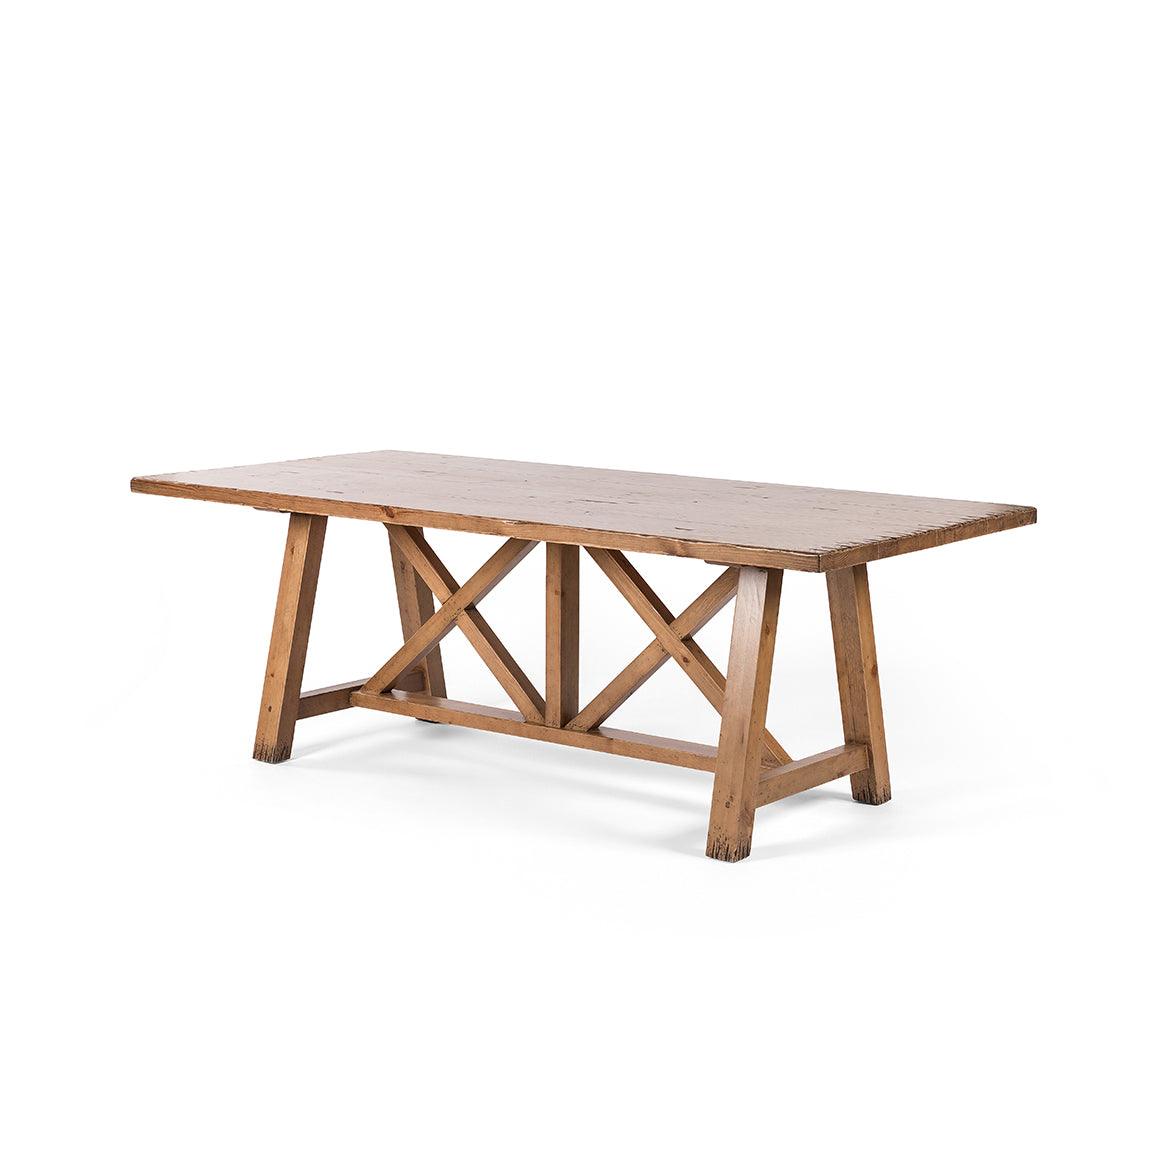 Trellis Pine Dining Table - Reimagine Designs - dining table, new